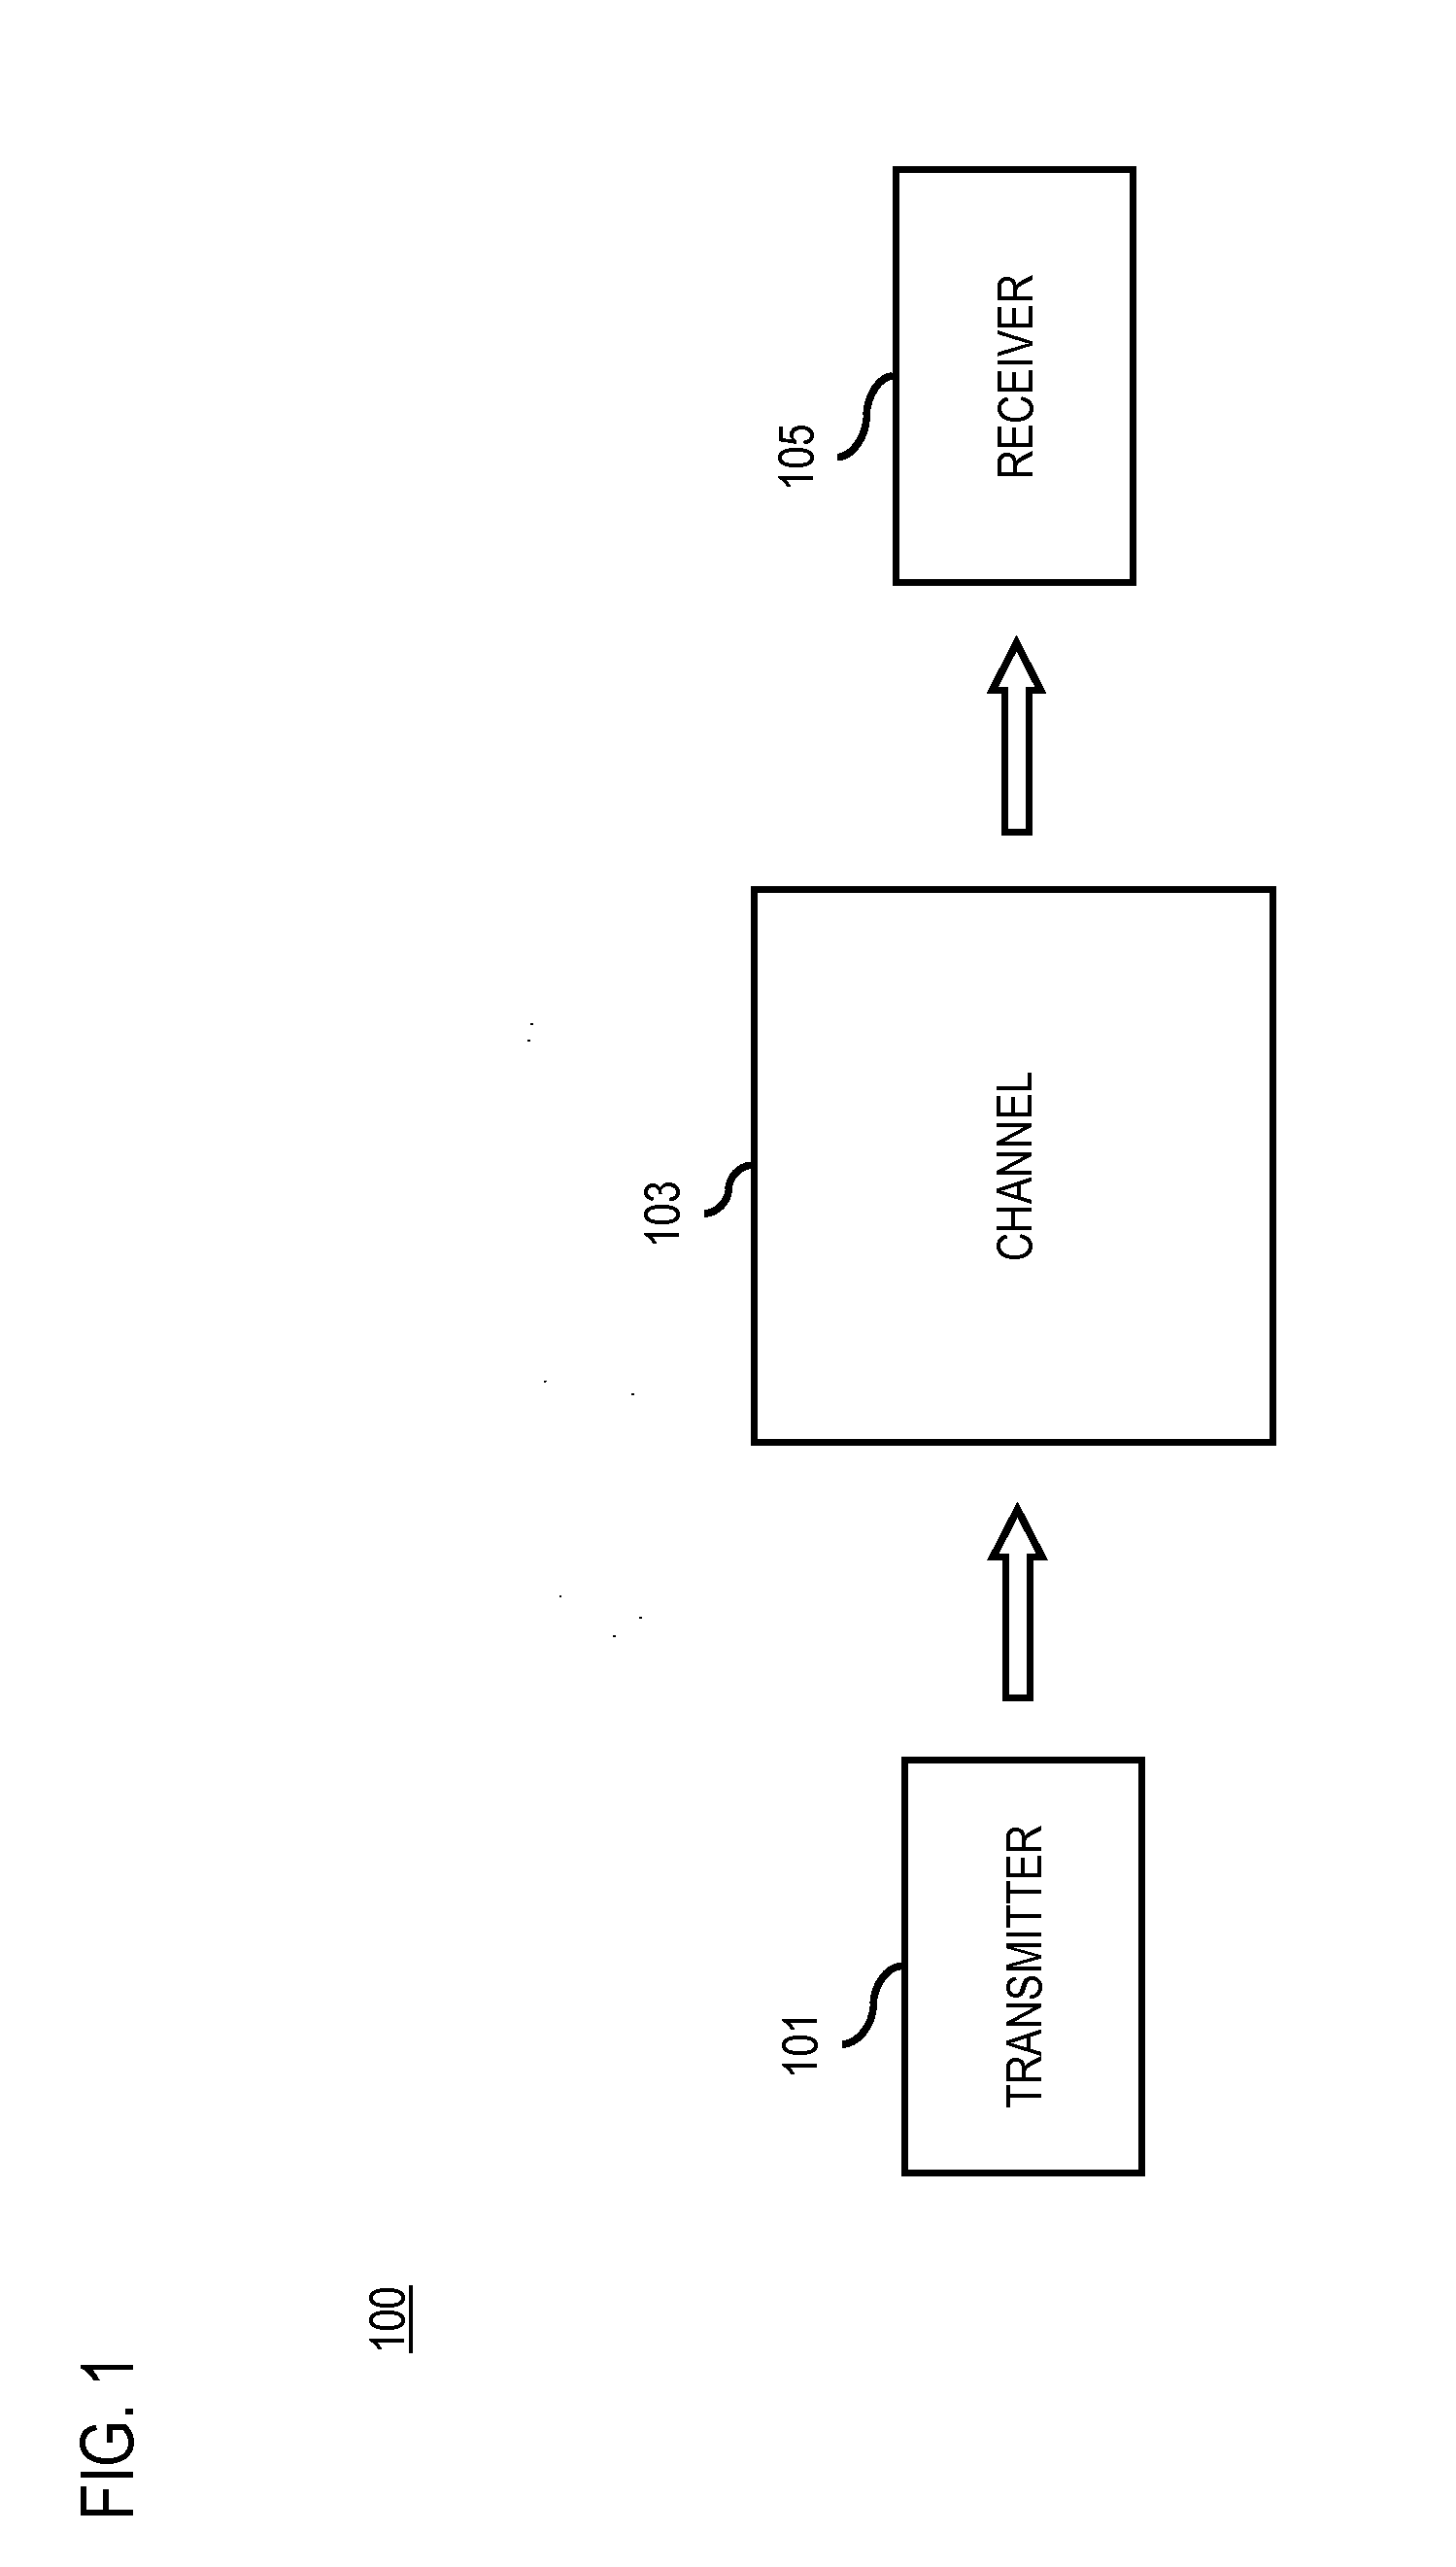 Method and system for providing low density parity check (LDPC) encoding and decoding